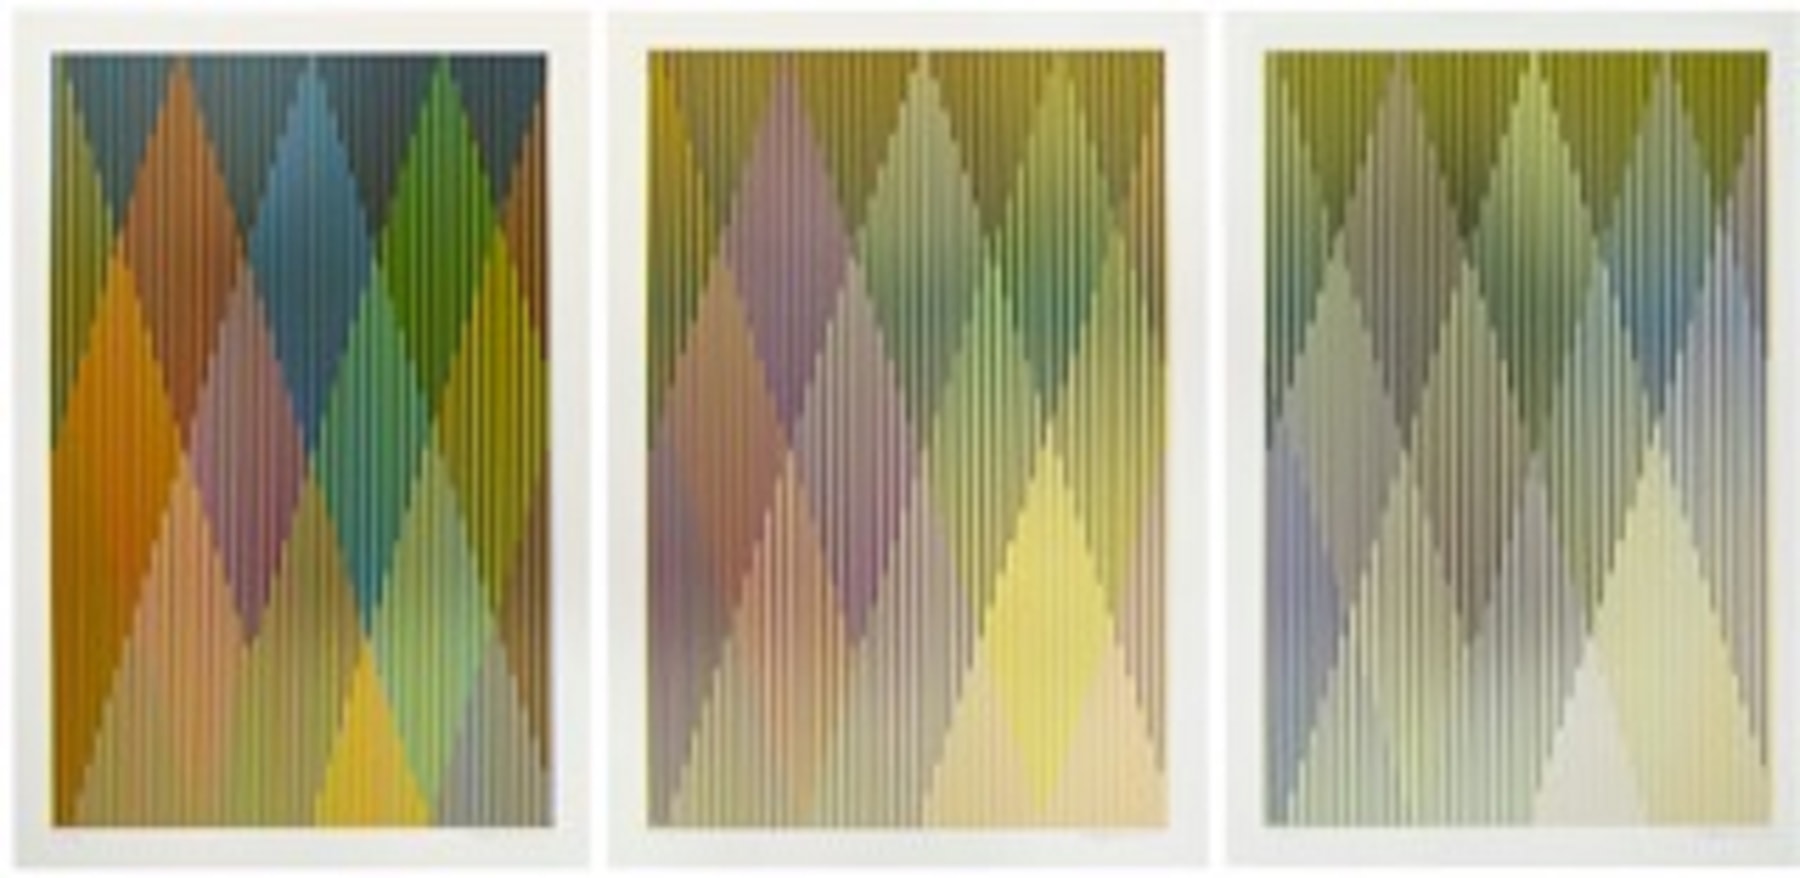 Perseus I, II, III
Carlos Cruz-Diez, 2017

​Portfolio, Silkscreen
39 3/8&amp;quot; x 27 1/2&amp;quot;&amp;nbsp;(100 cm x 70 cm) each
Edition of 50
$20,000

Printed by Edition Domberger, Stuttgart, Germany
Published by&amp;nbsp;Harvey Bayer Fine Art

INQUIRE